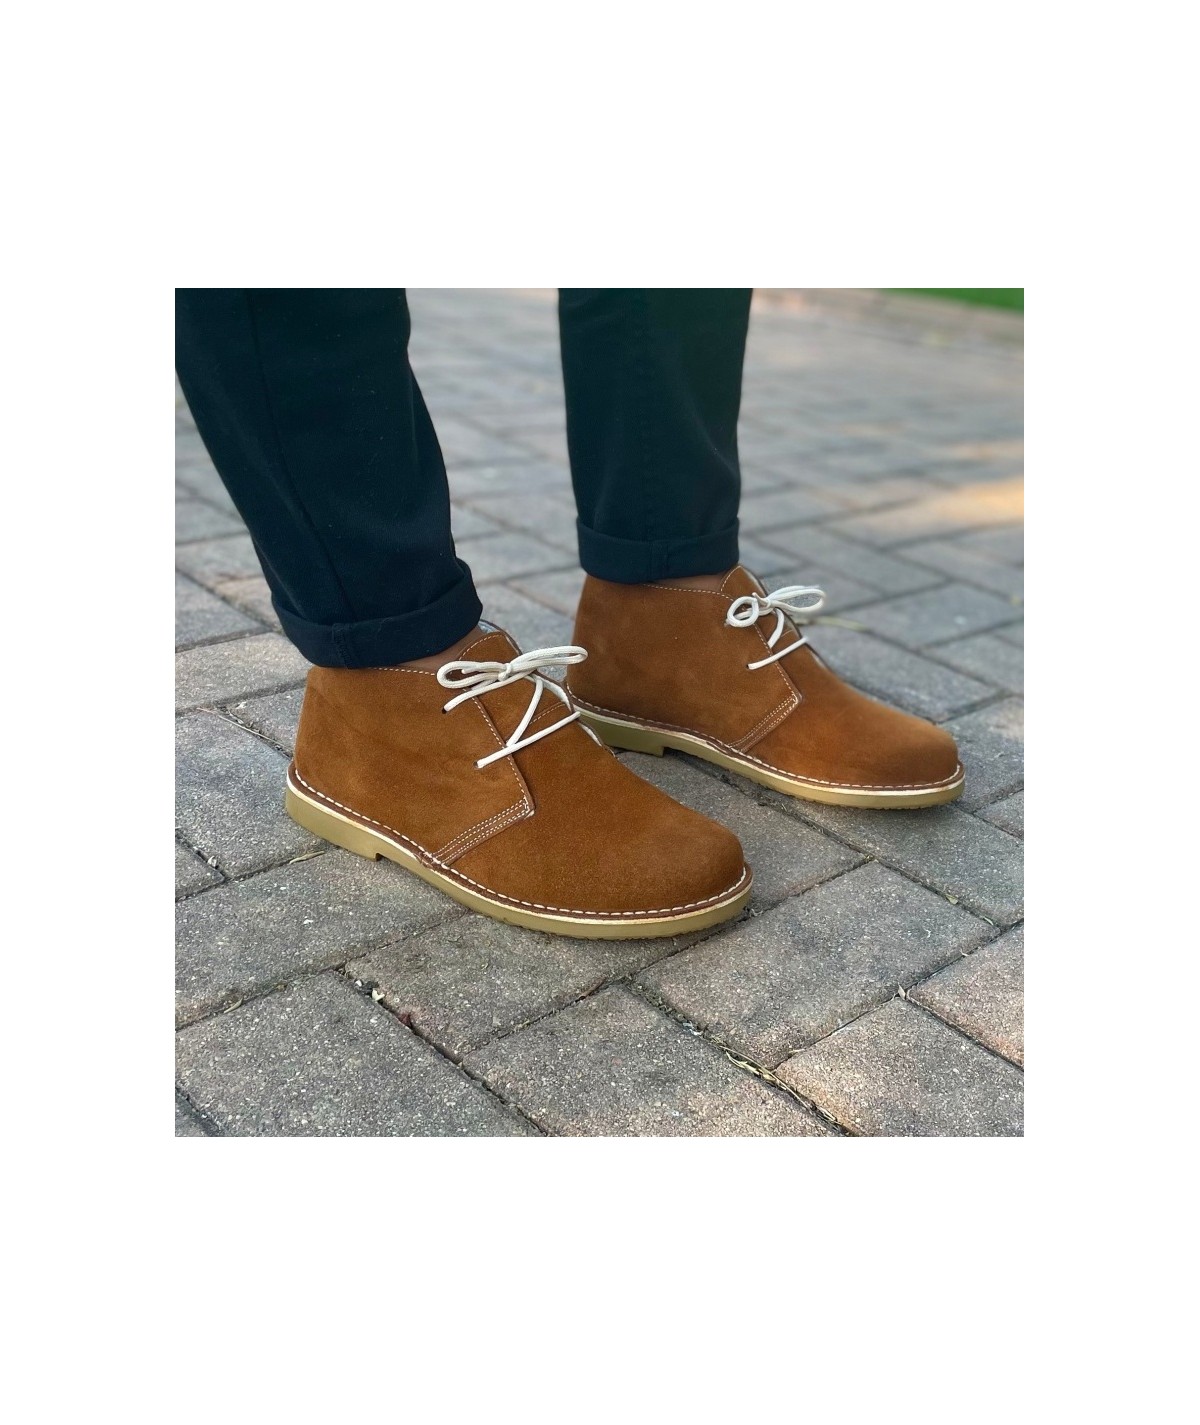 Brown Setter desert boots with shearling lining for men.